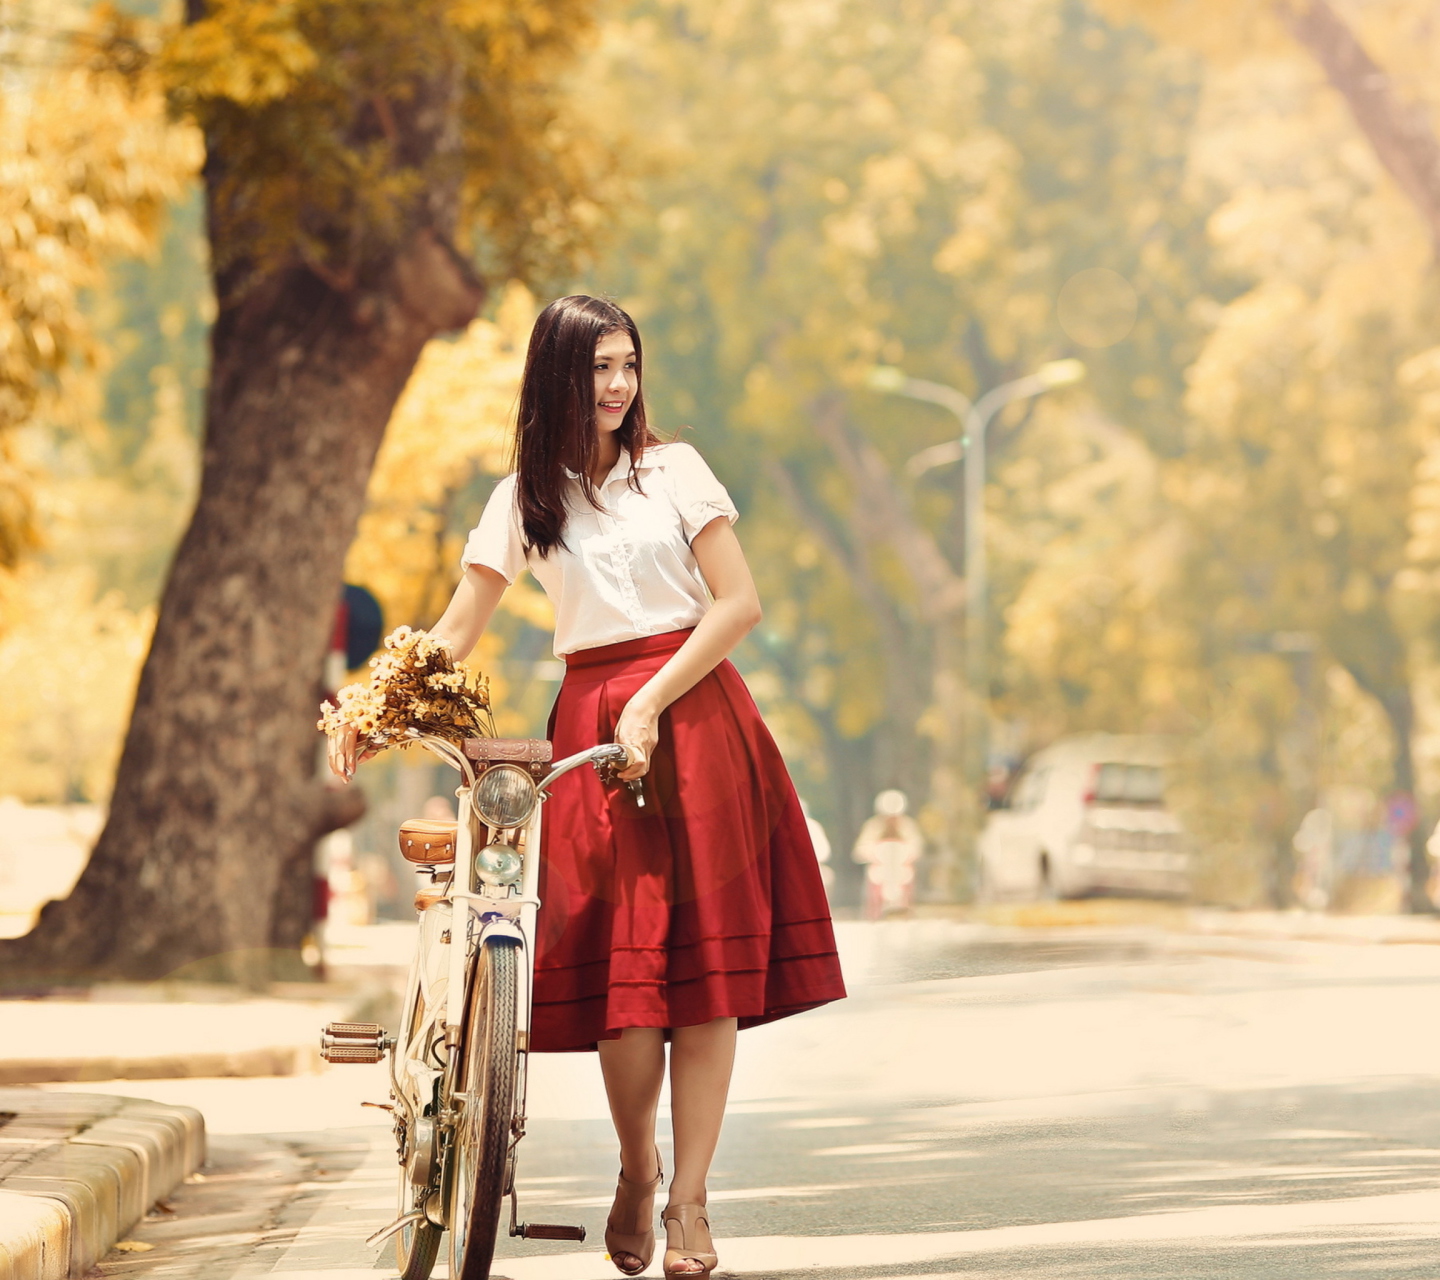 Romantic Girl With Bicycle And Flowers screenshot #1 1440x1280